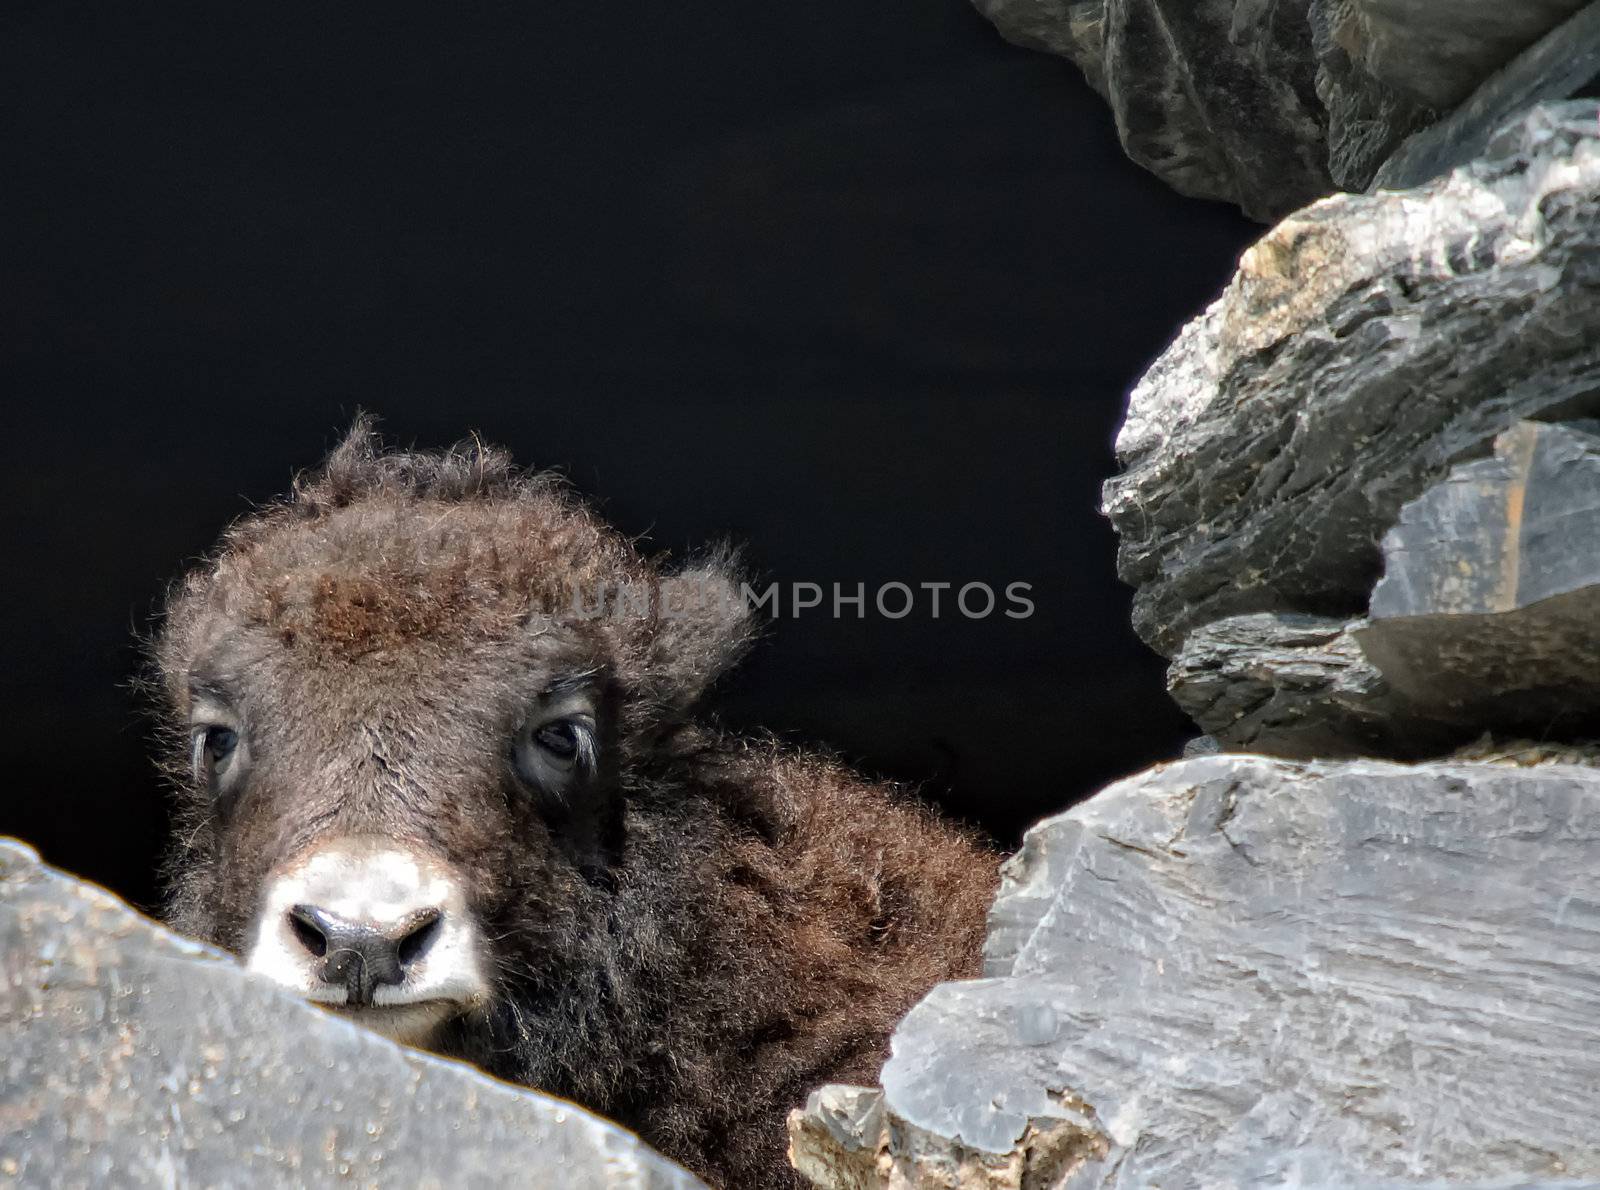 Picture of a baby yak trying to hide behind some rocks